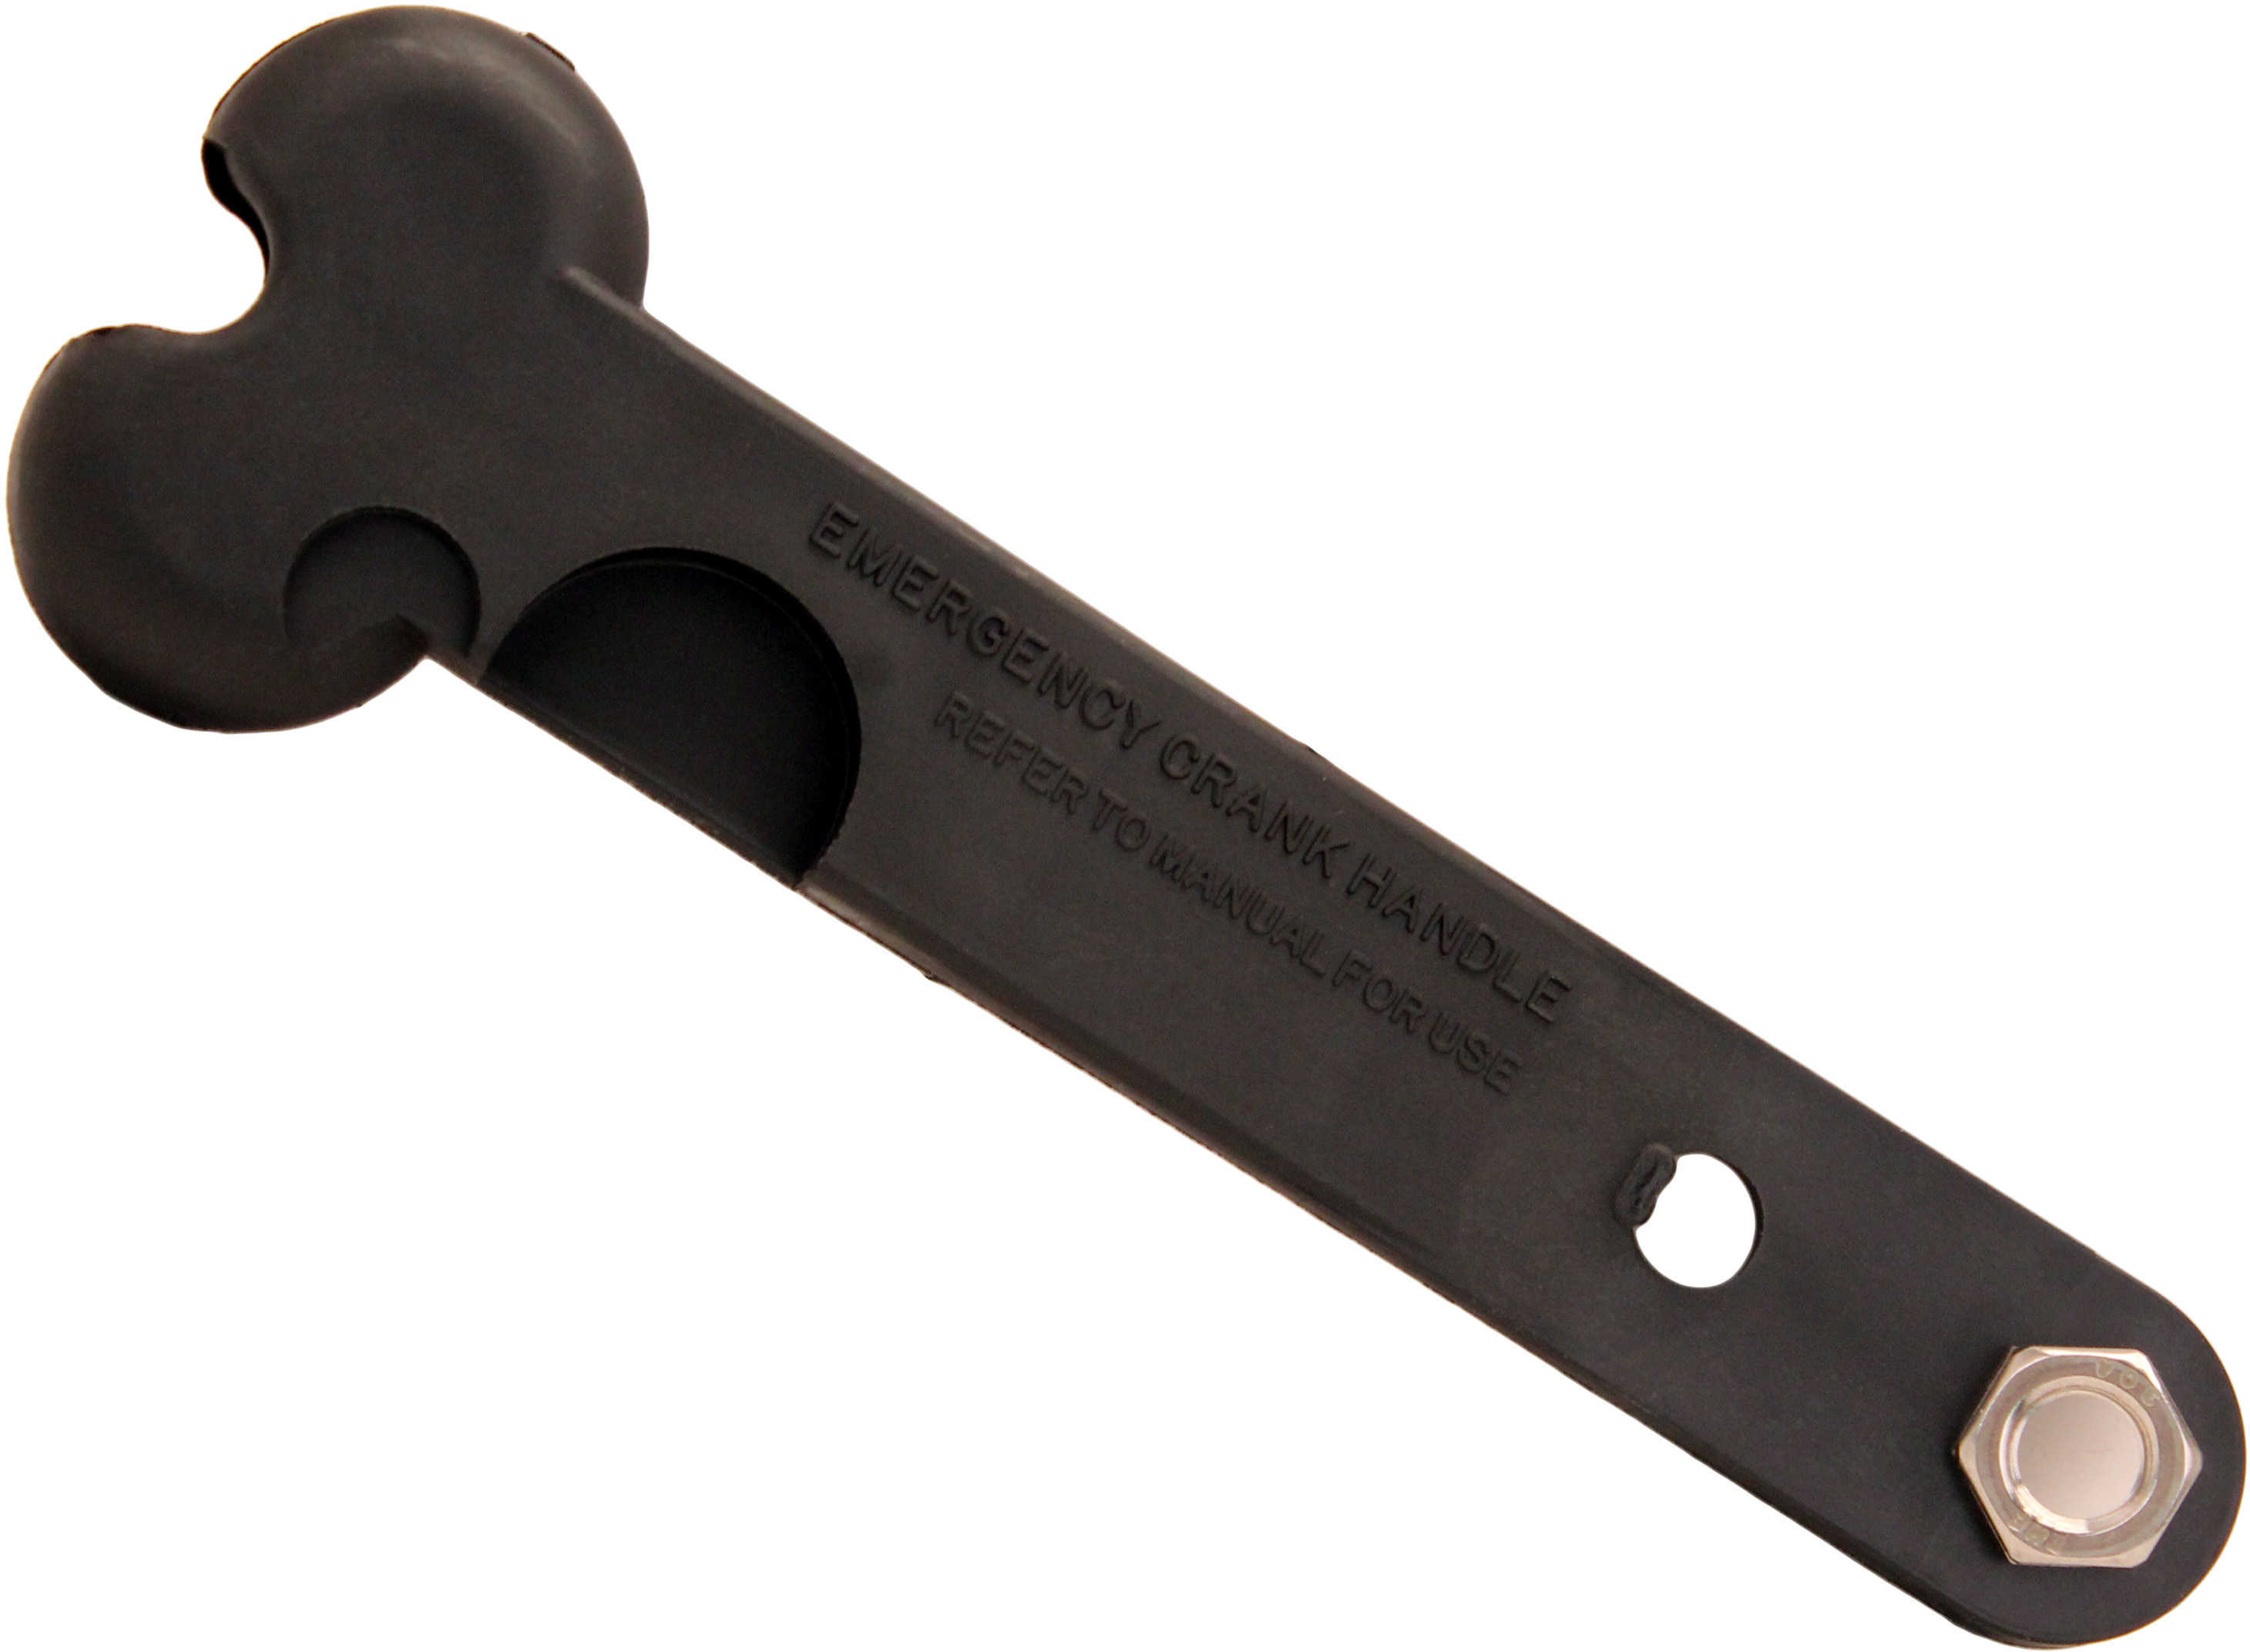 Scotty Replacement Emergency Crank Handle Md: 1132